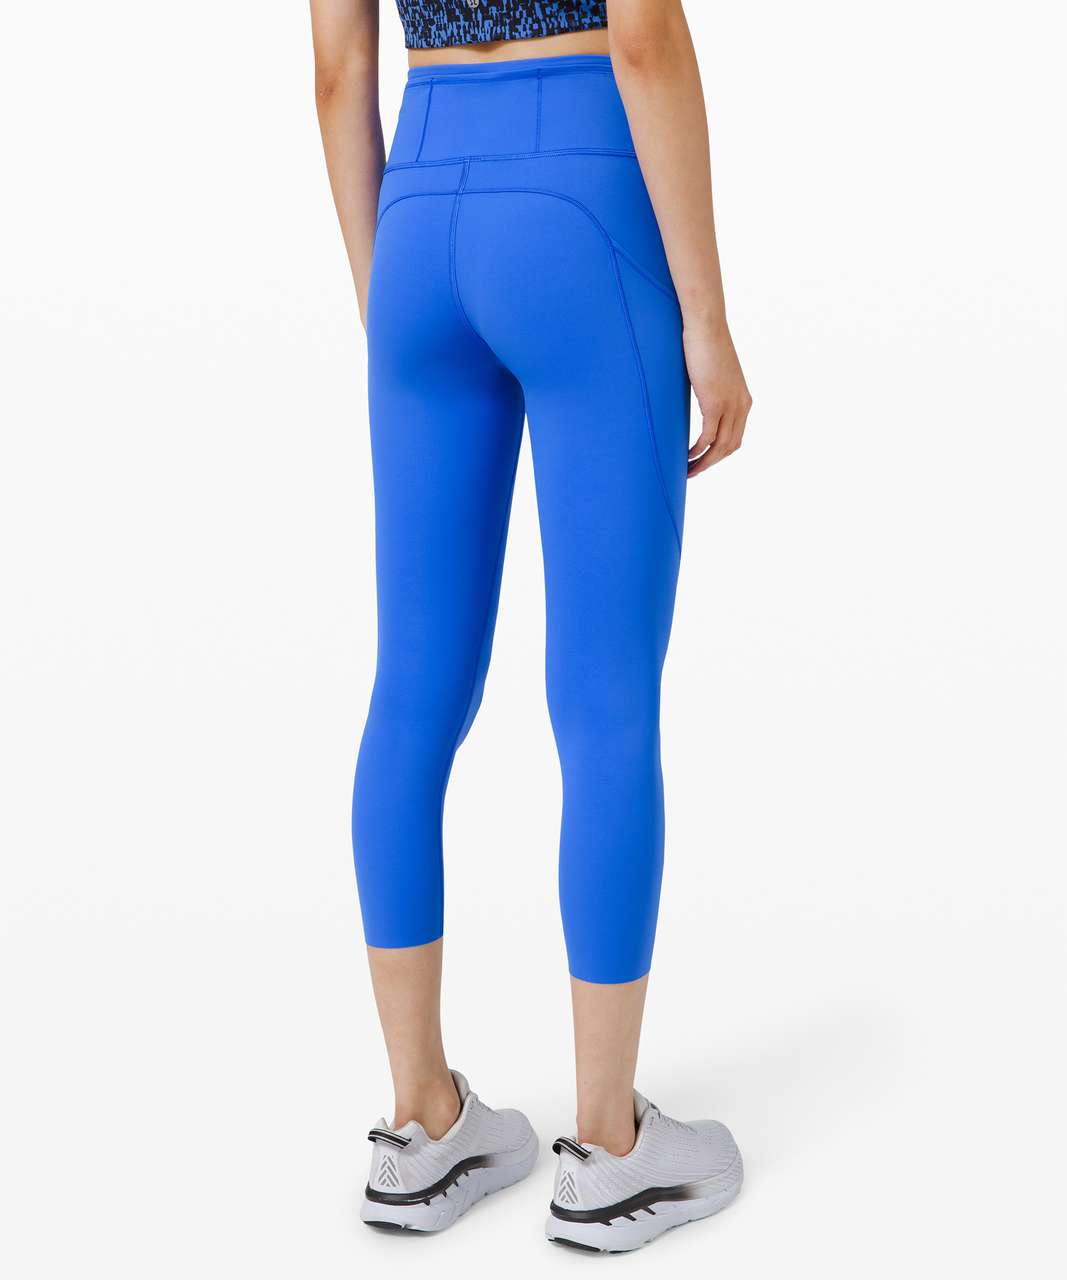 Lululemon Fast and Free High-Rise Crop II 23 *Non-Reflective